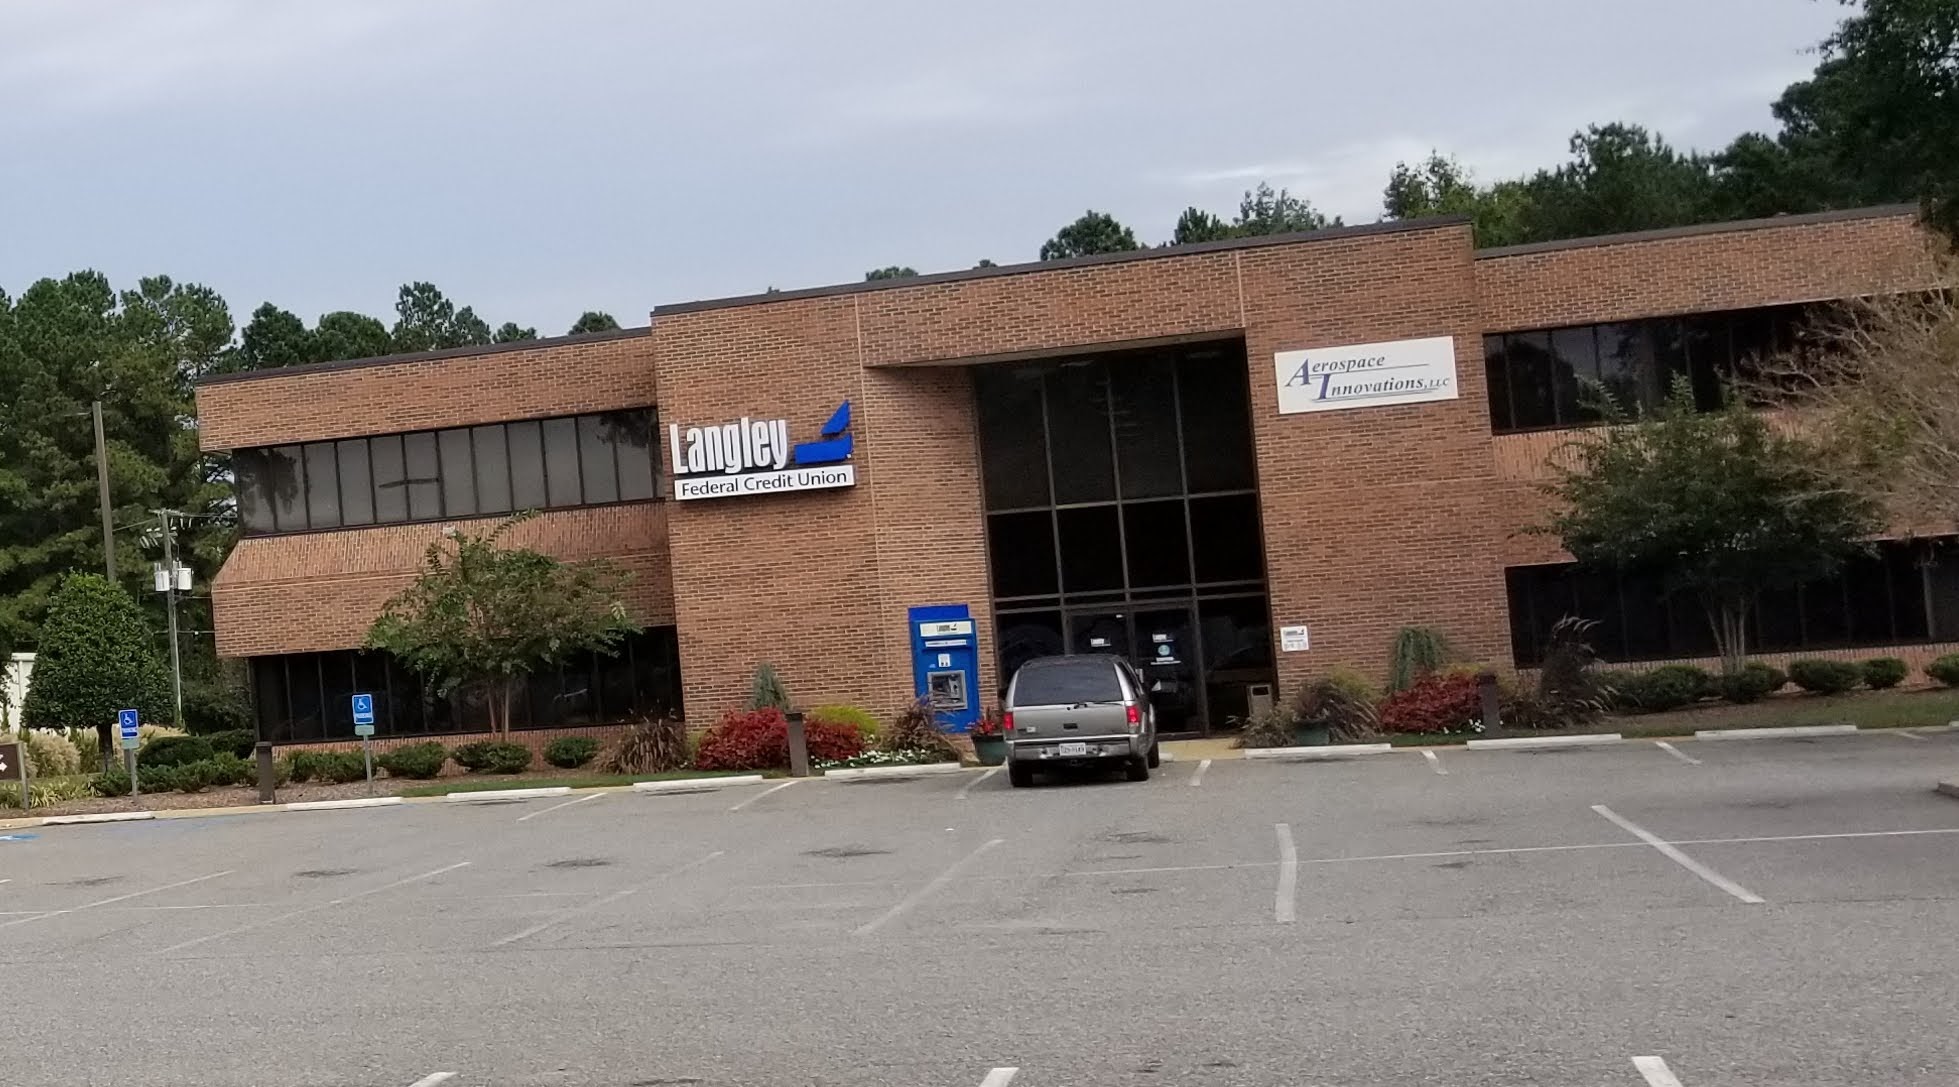 Langley Federal Credit Union